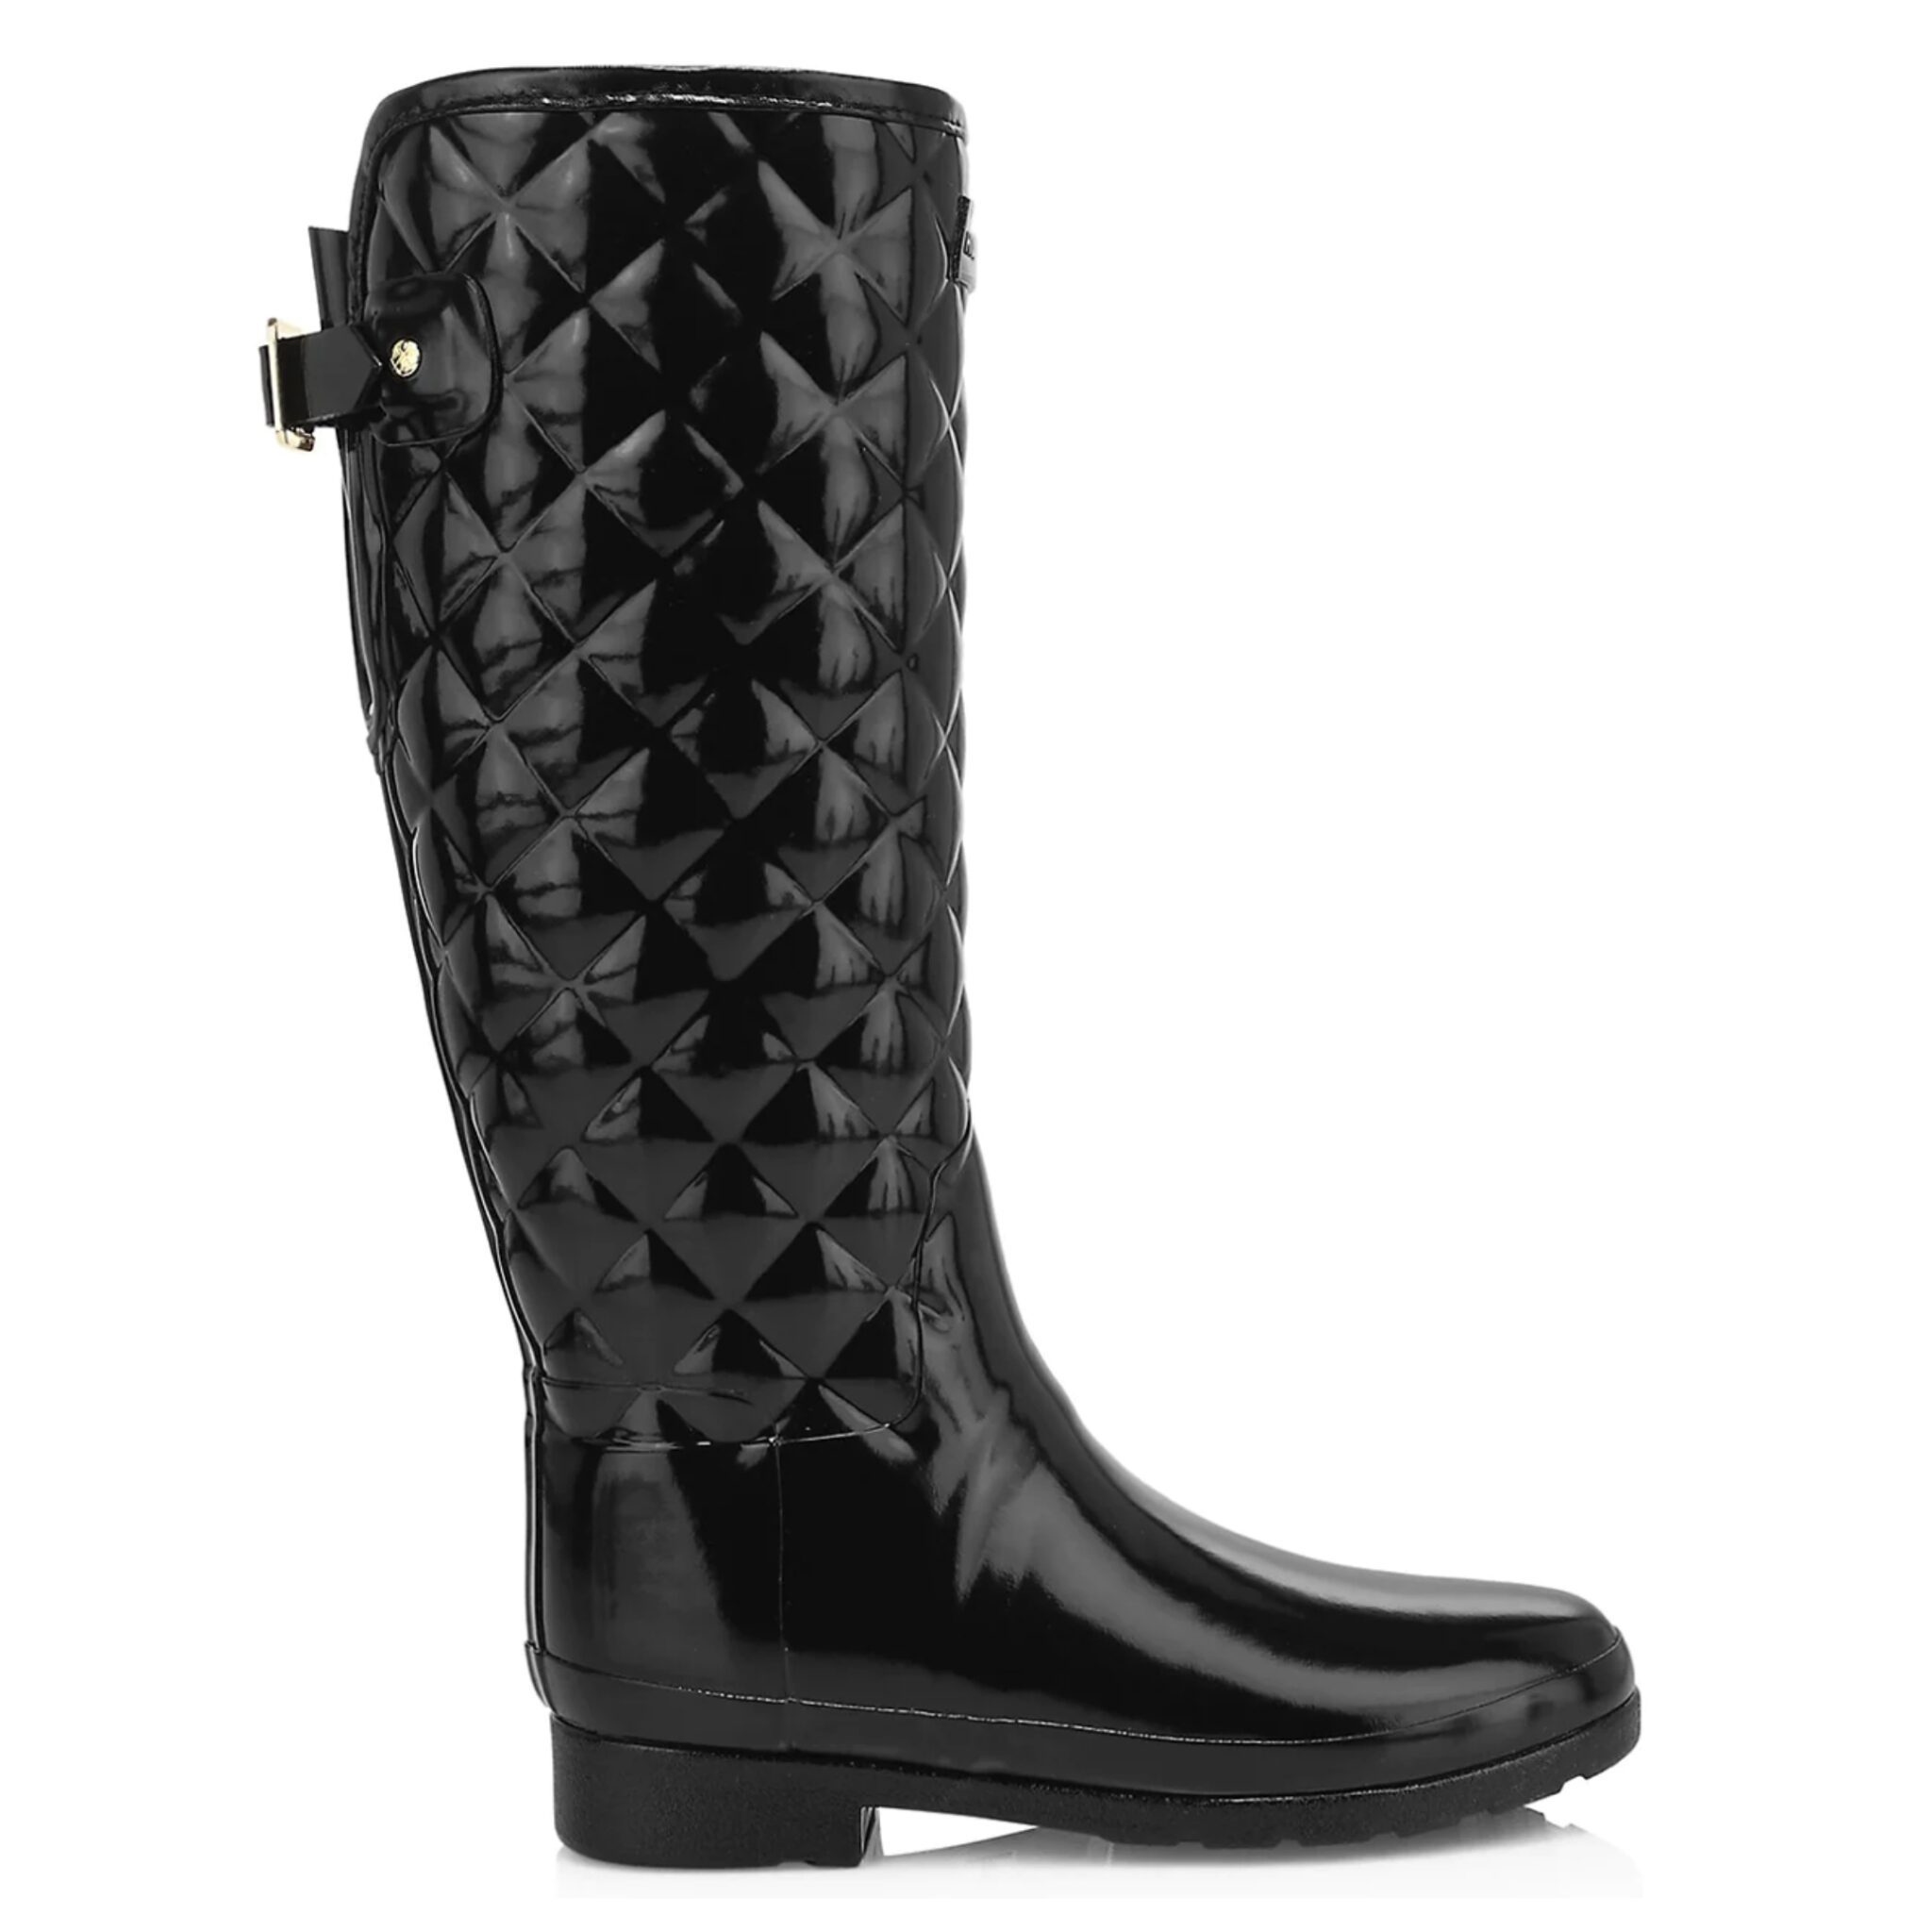 Black Hunter rainboots to wear with leather leggings.